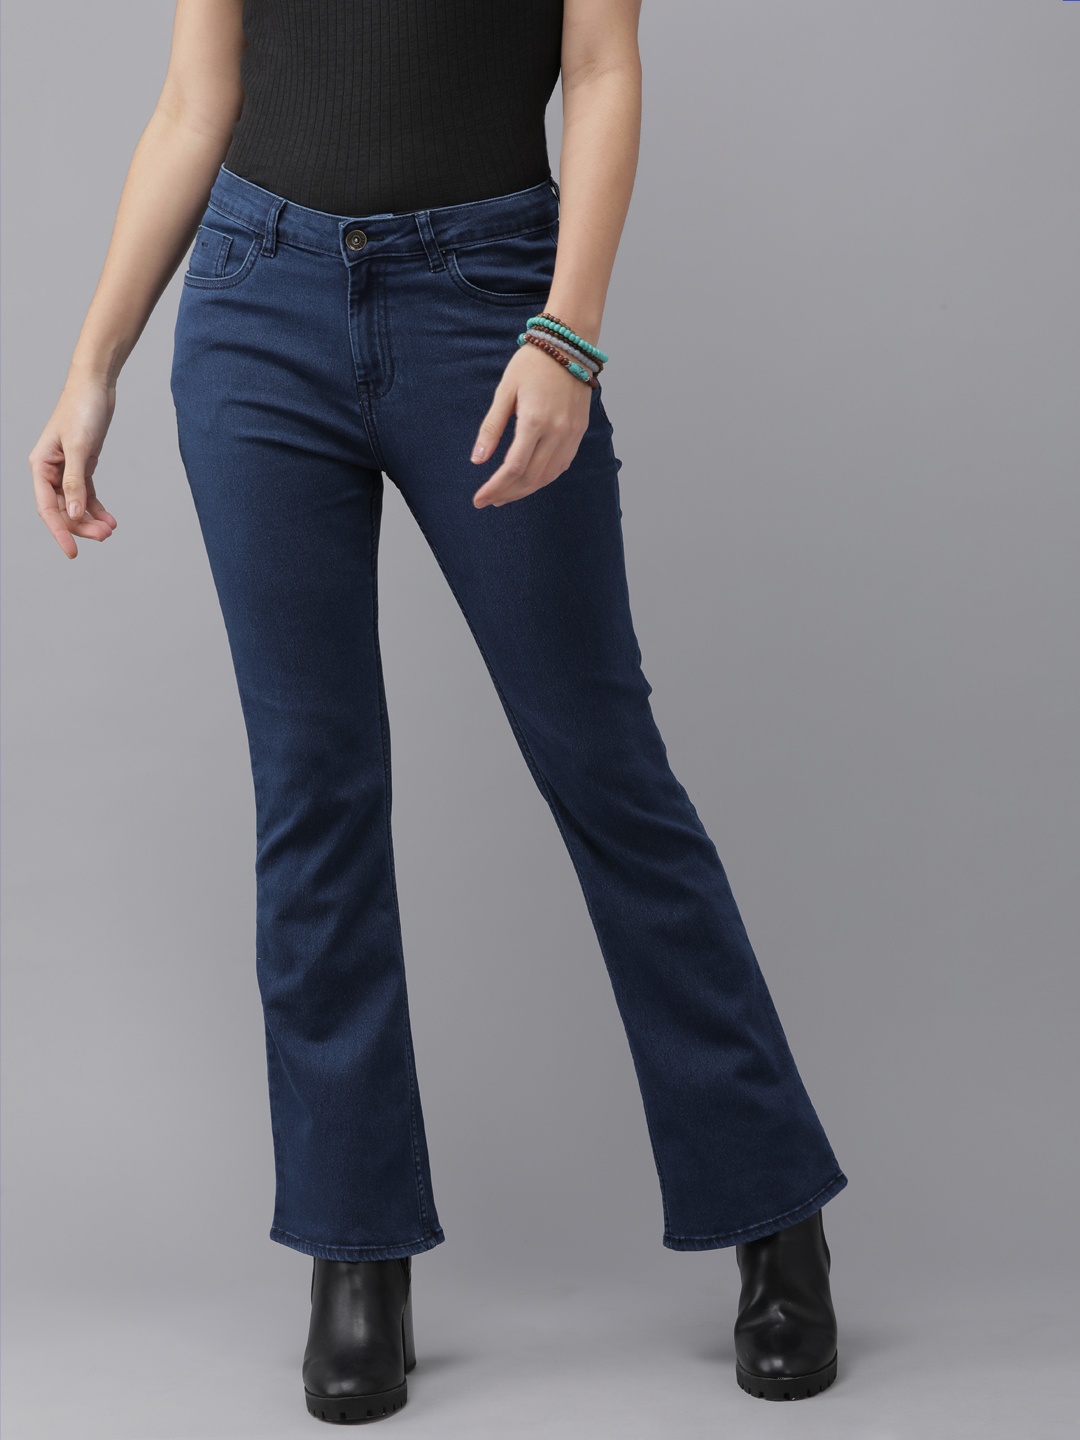 

Roadster Women Navy Blue Flared High-Rise Stretchable Jeans